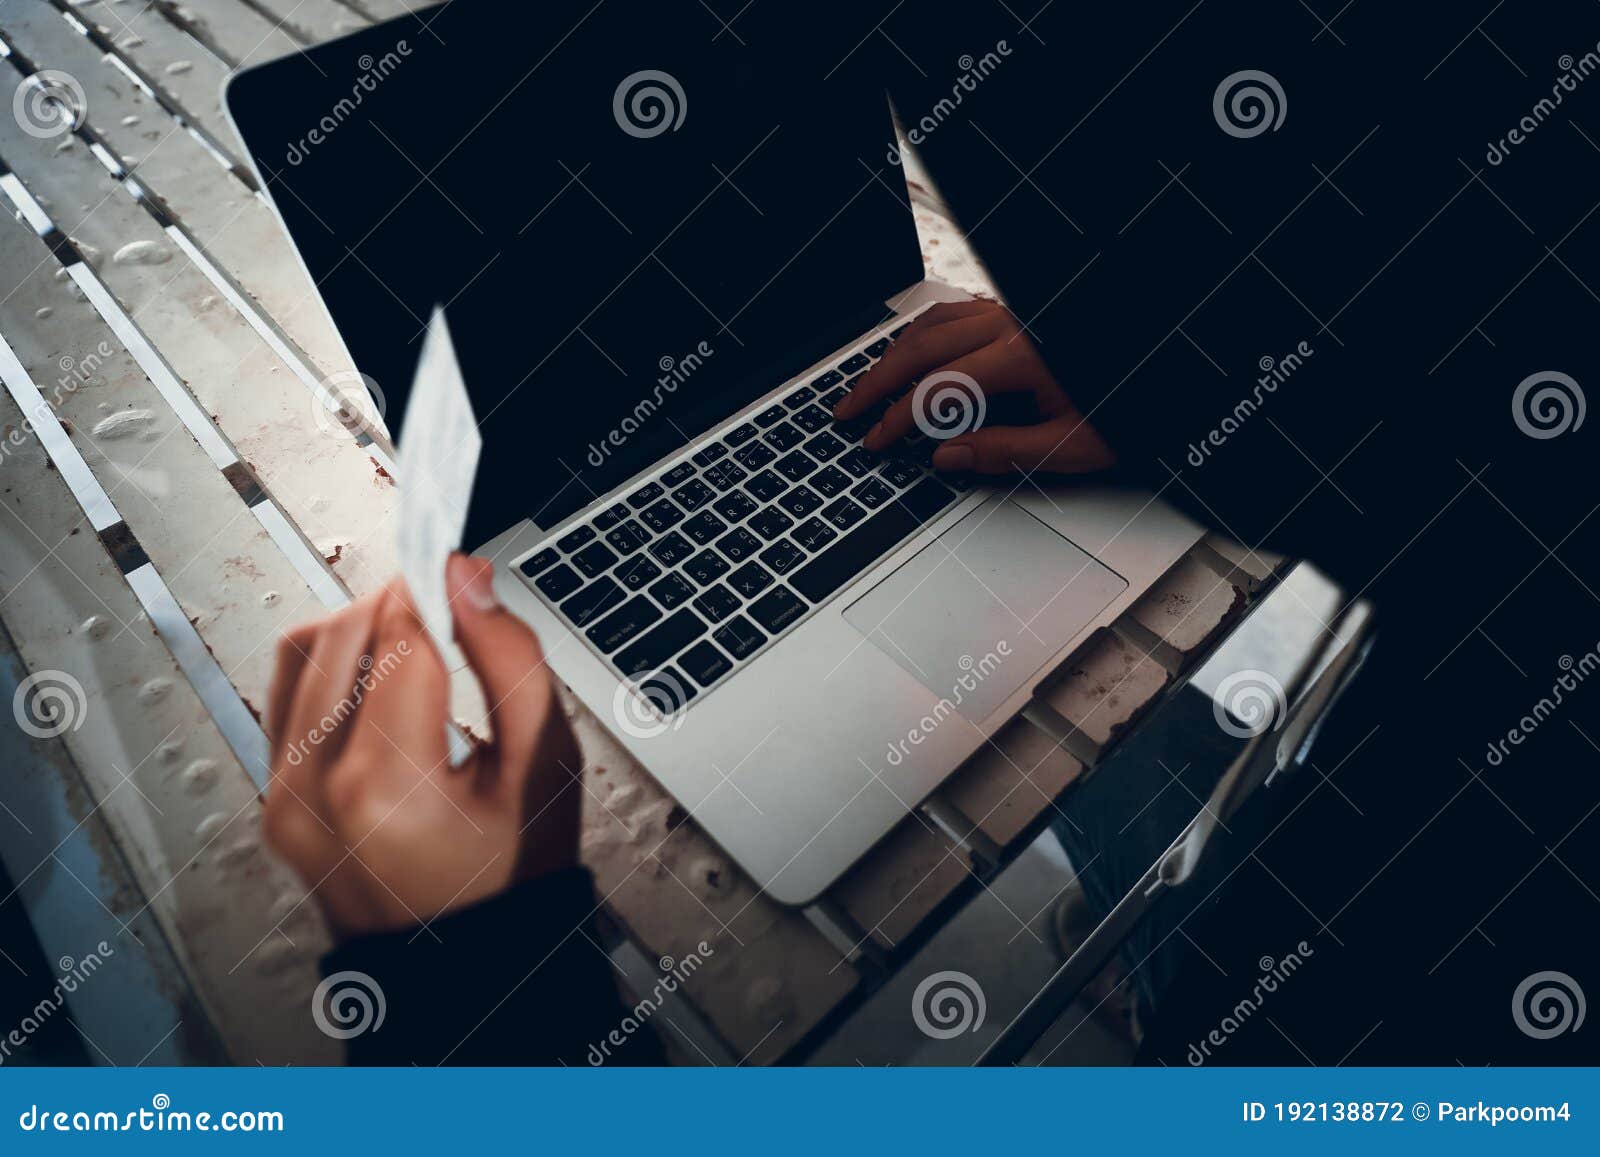 Hacker In The Dark Breaks The Access To Steal Information Stock Image - Image of cyberspace 